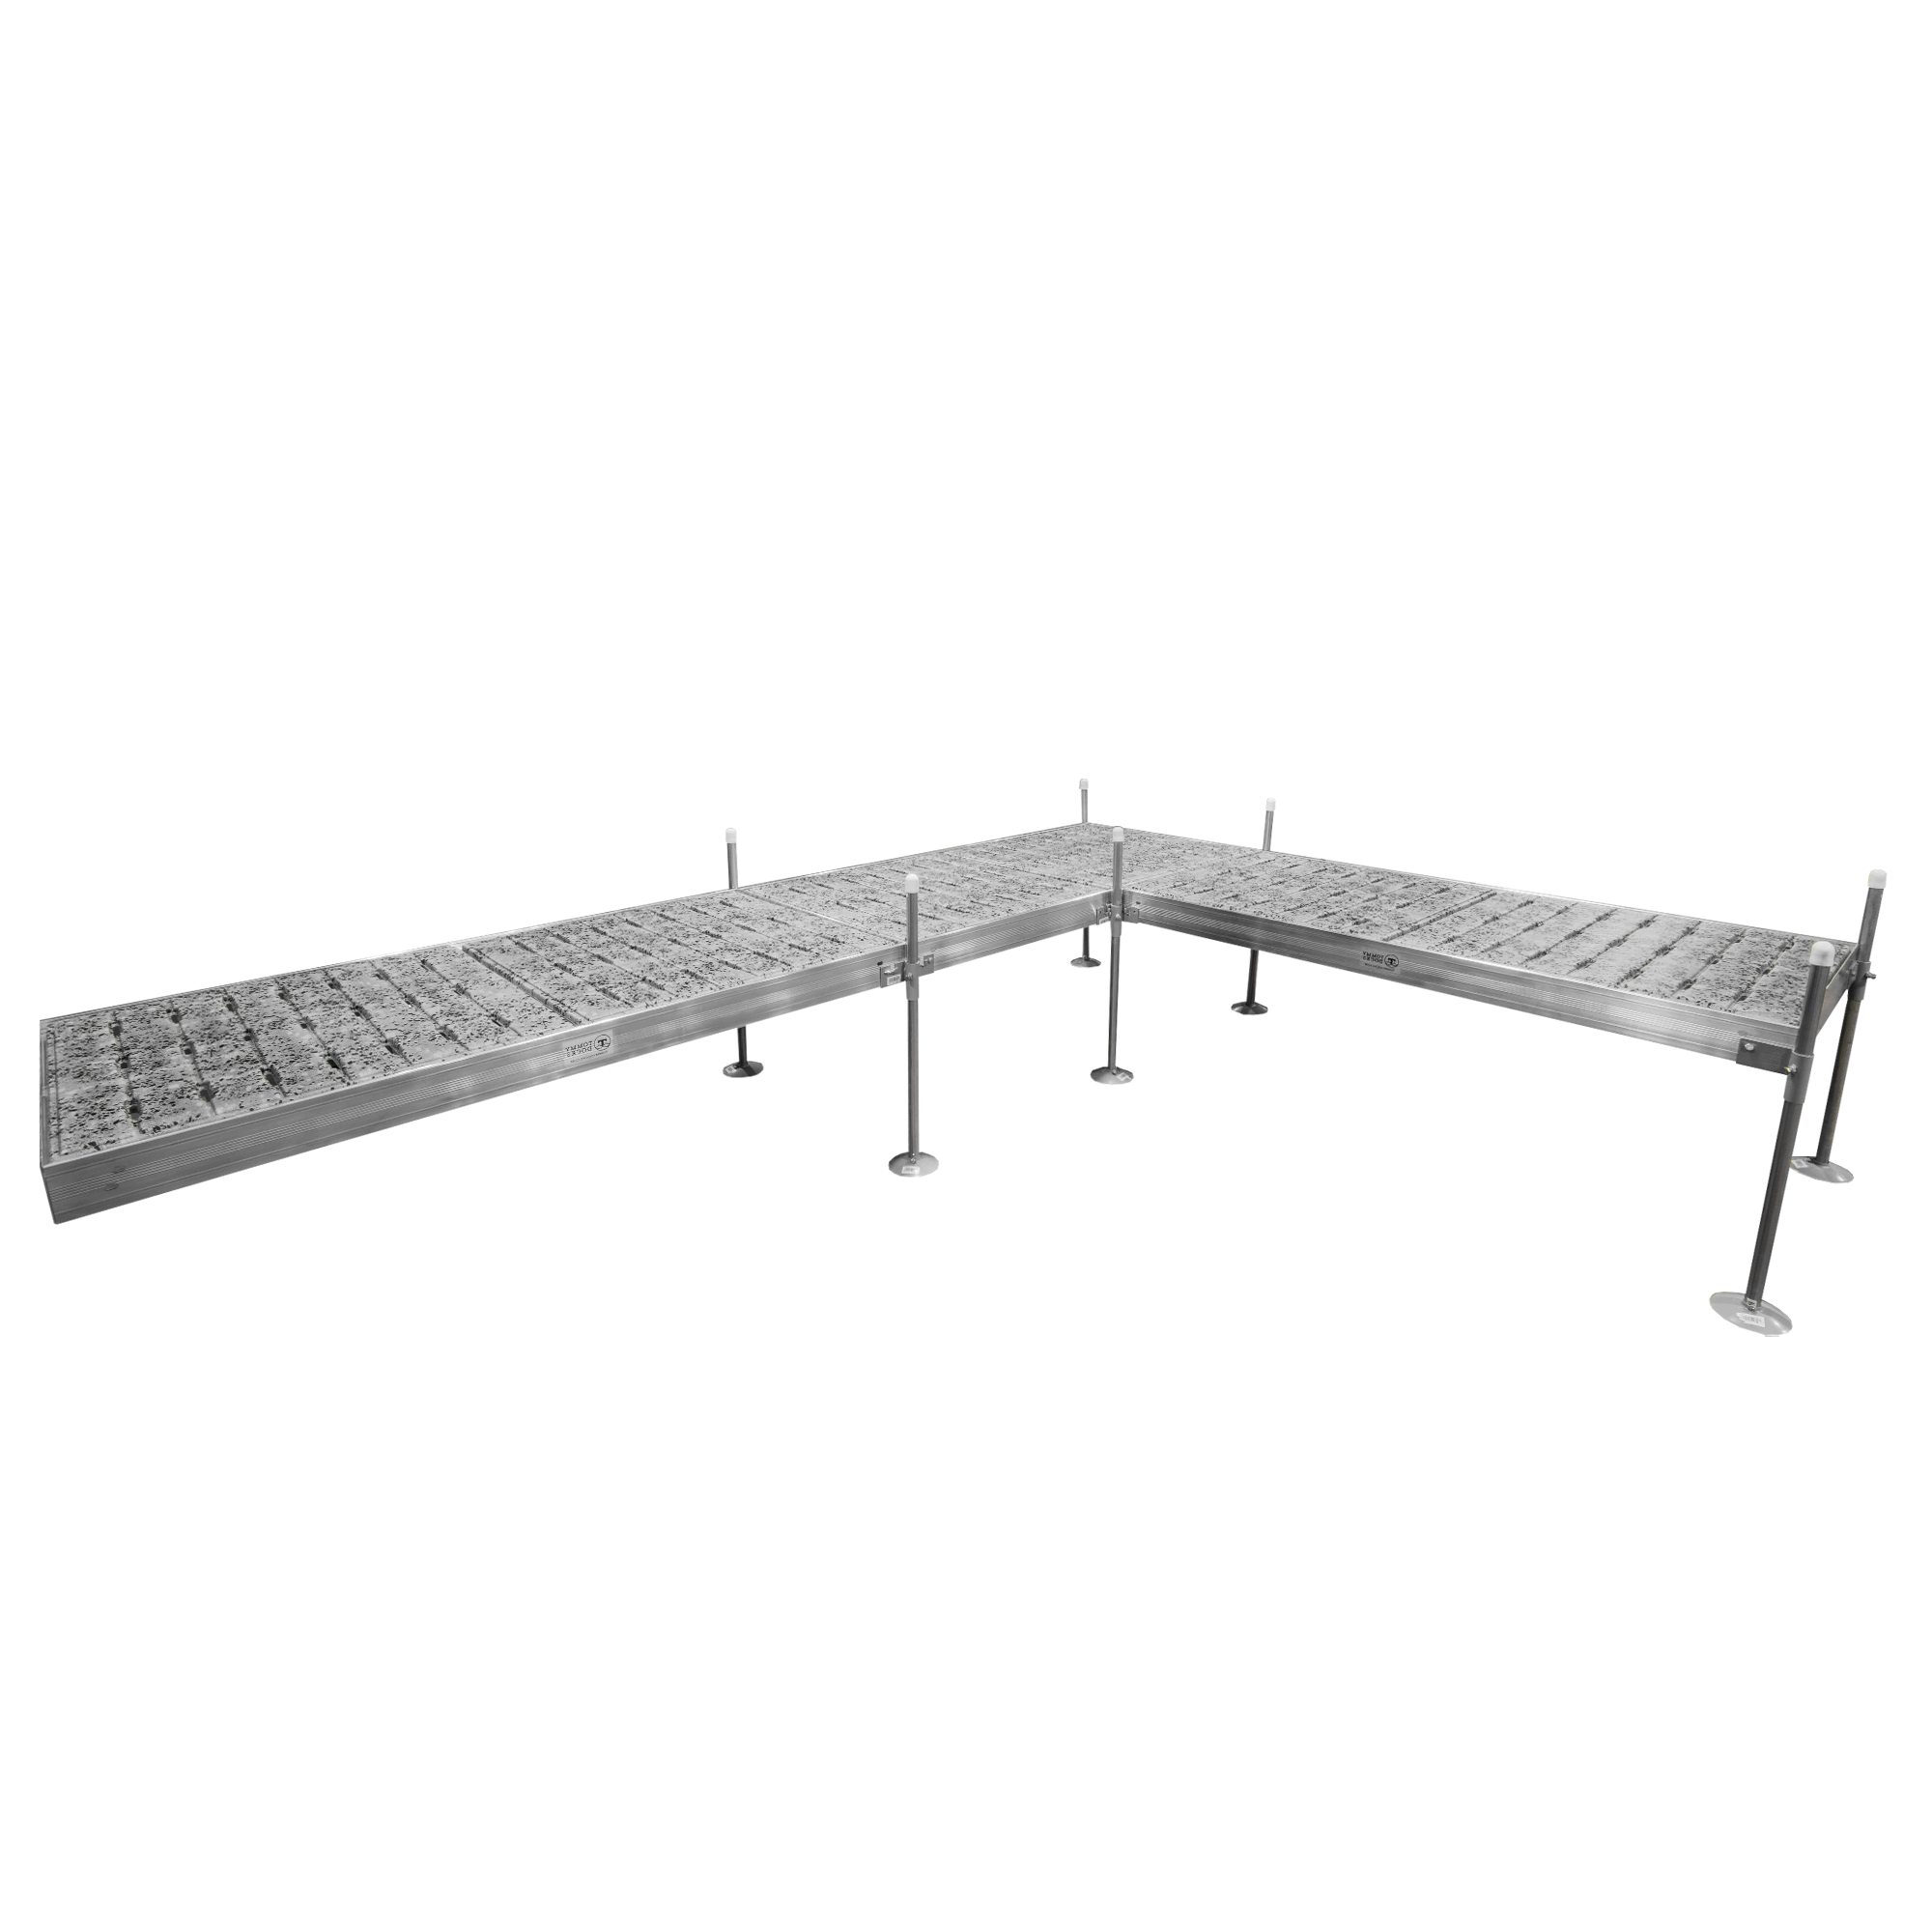 16' L-Shaped Boat Dock System with Aluminum Frame and Thermoformed Terrazzo Decking